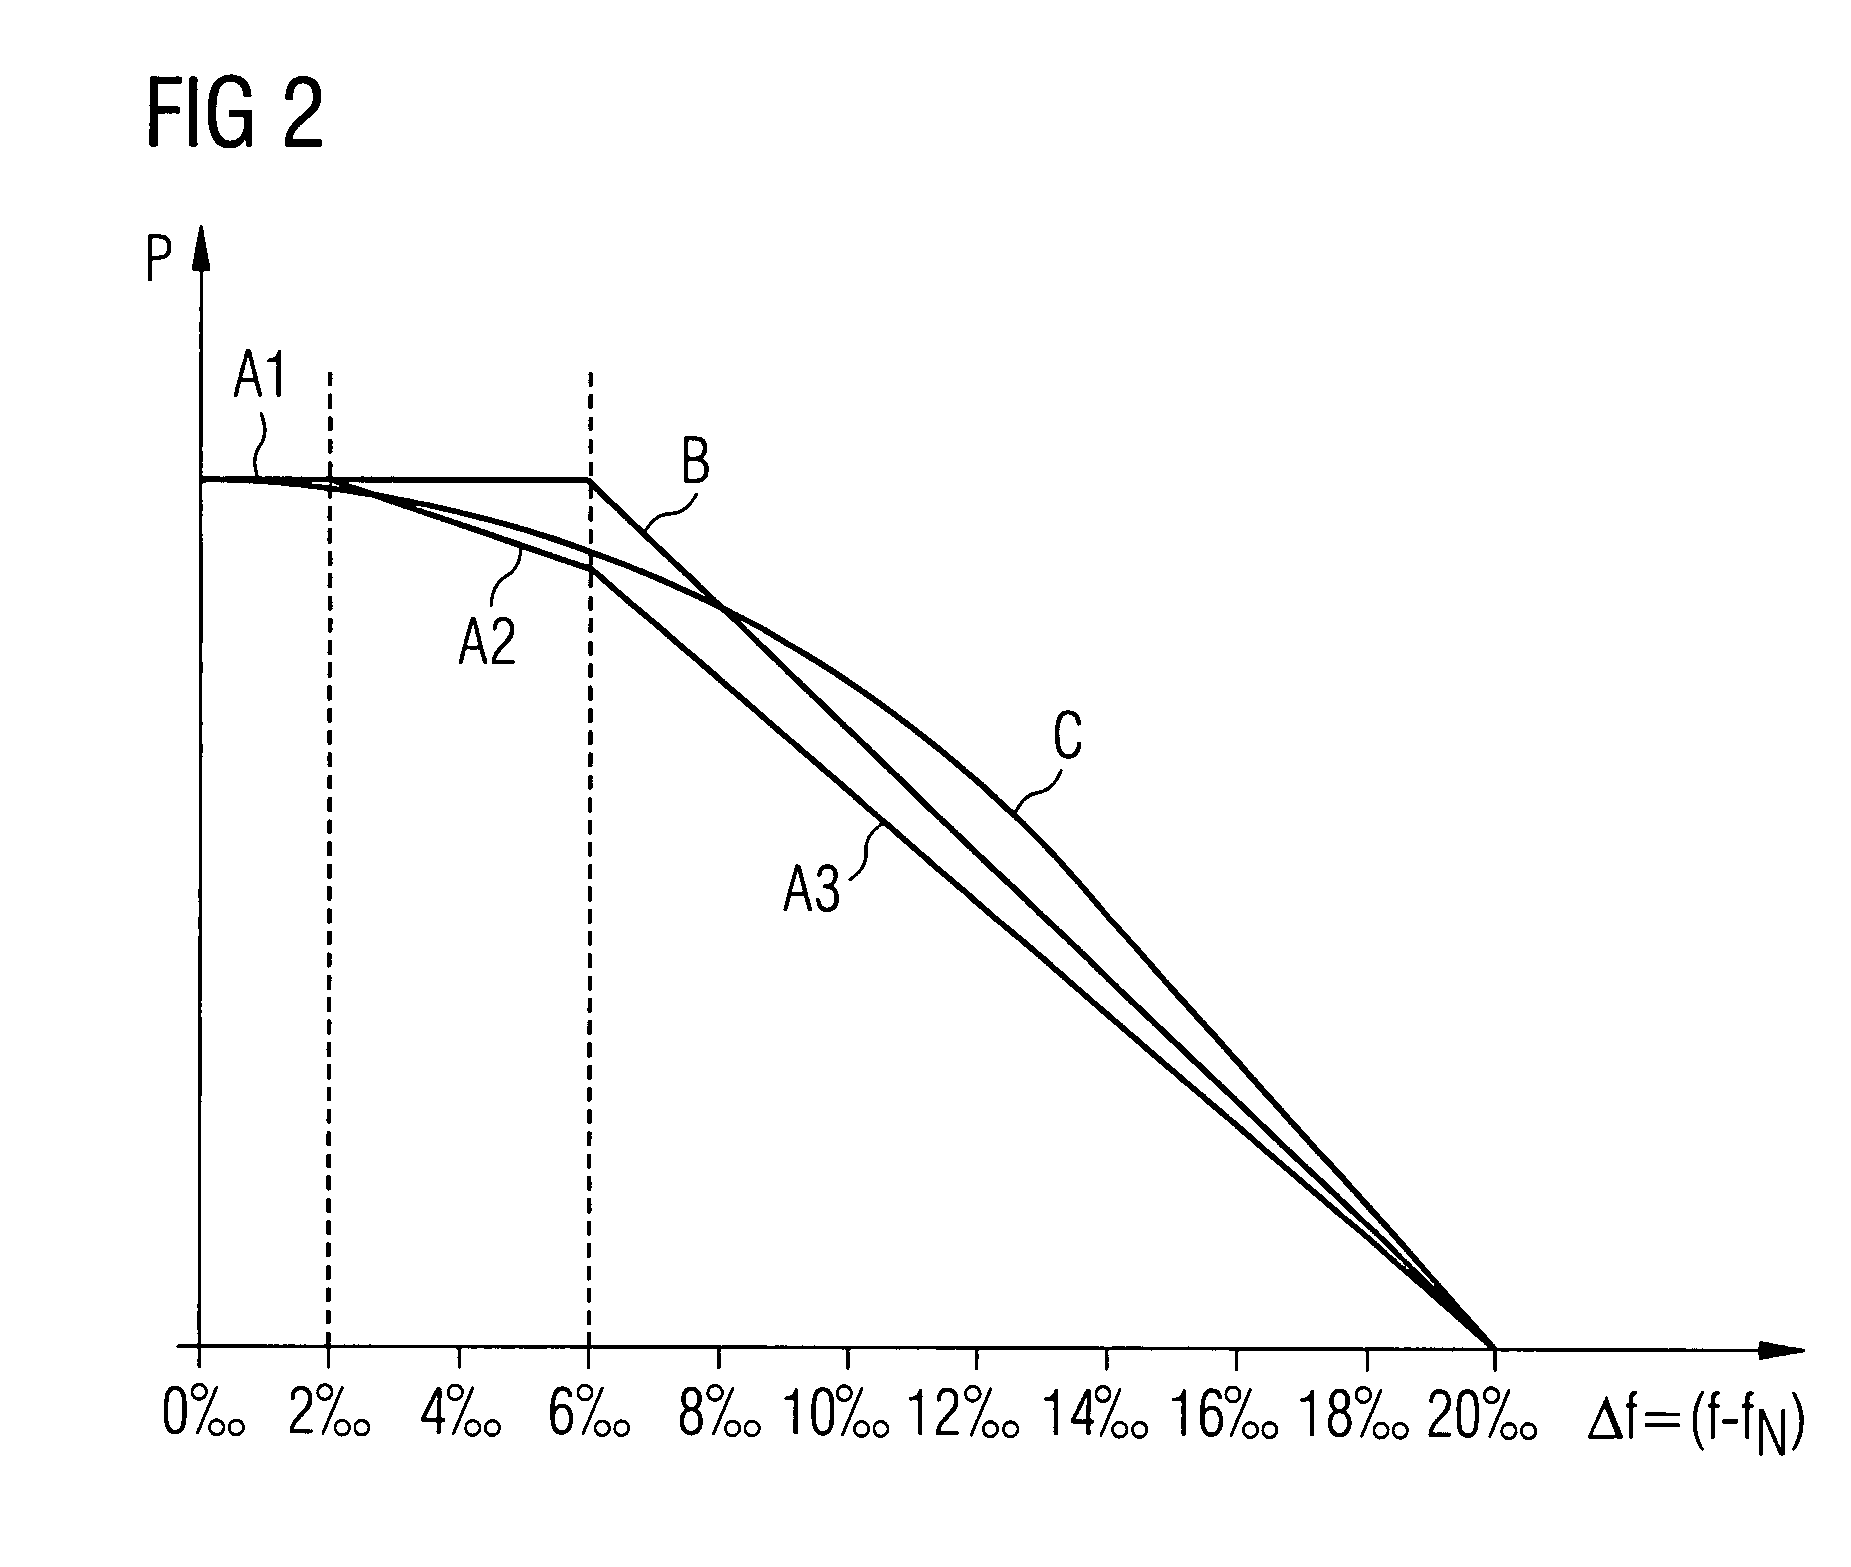 Wind energy installation and method of controlling the output power from a wind energy installation